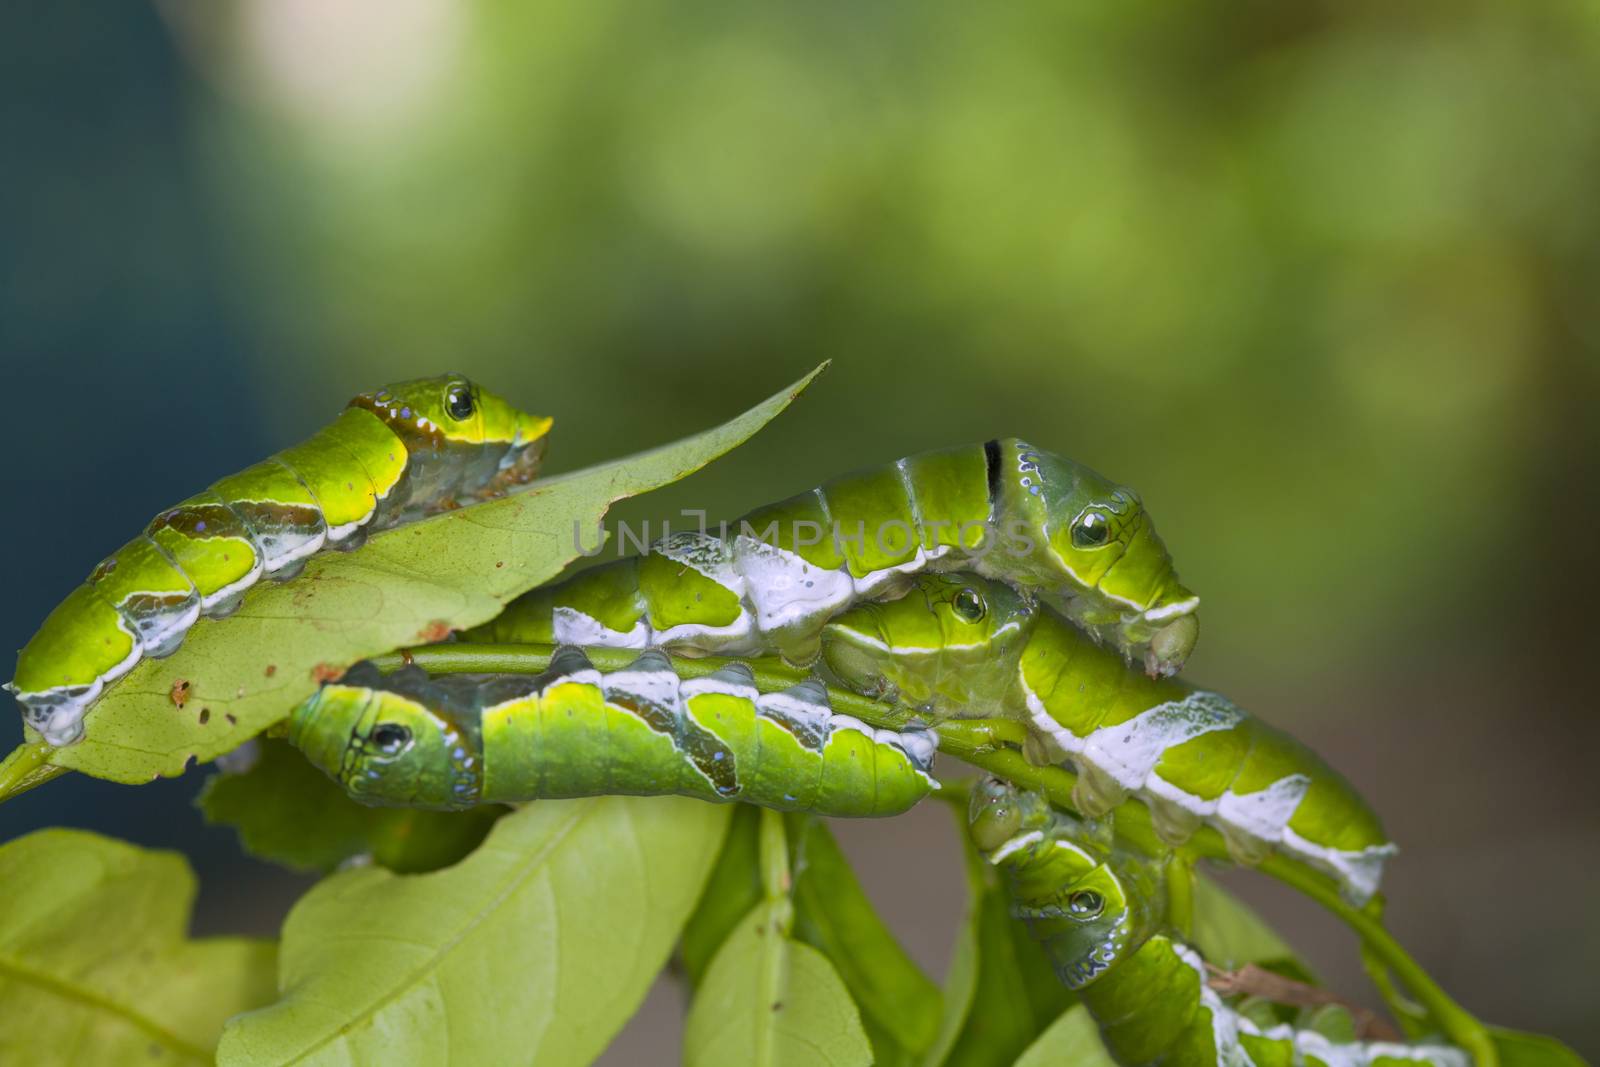 caterpillar worm on branch in the garden by jee1999